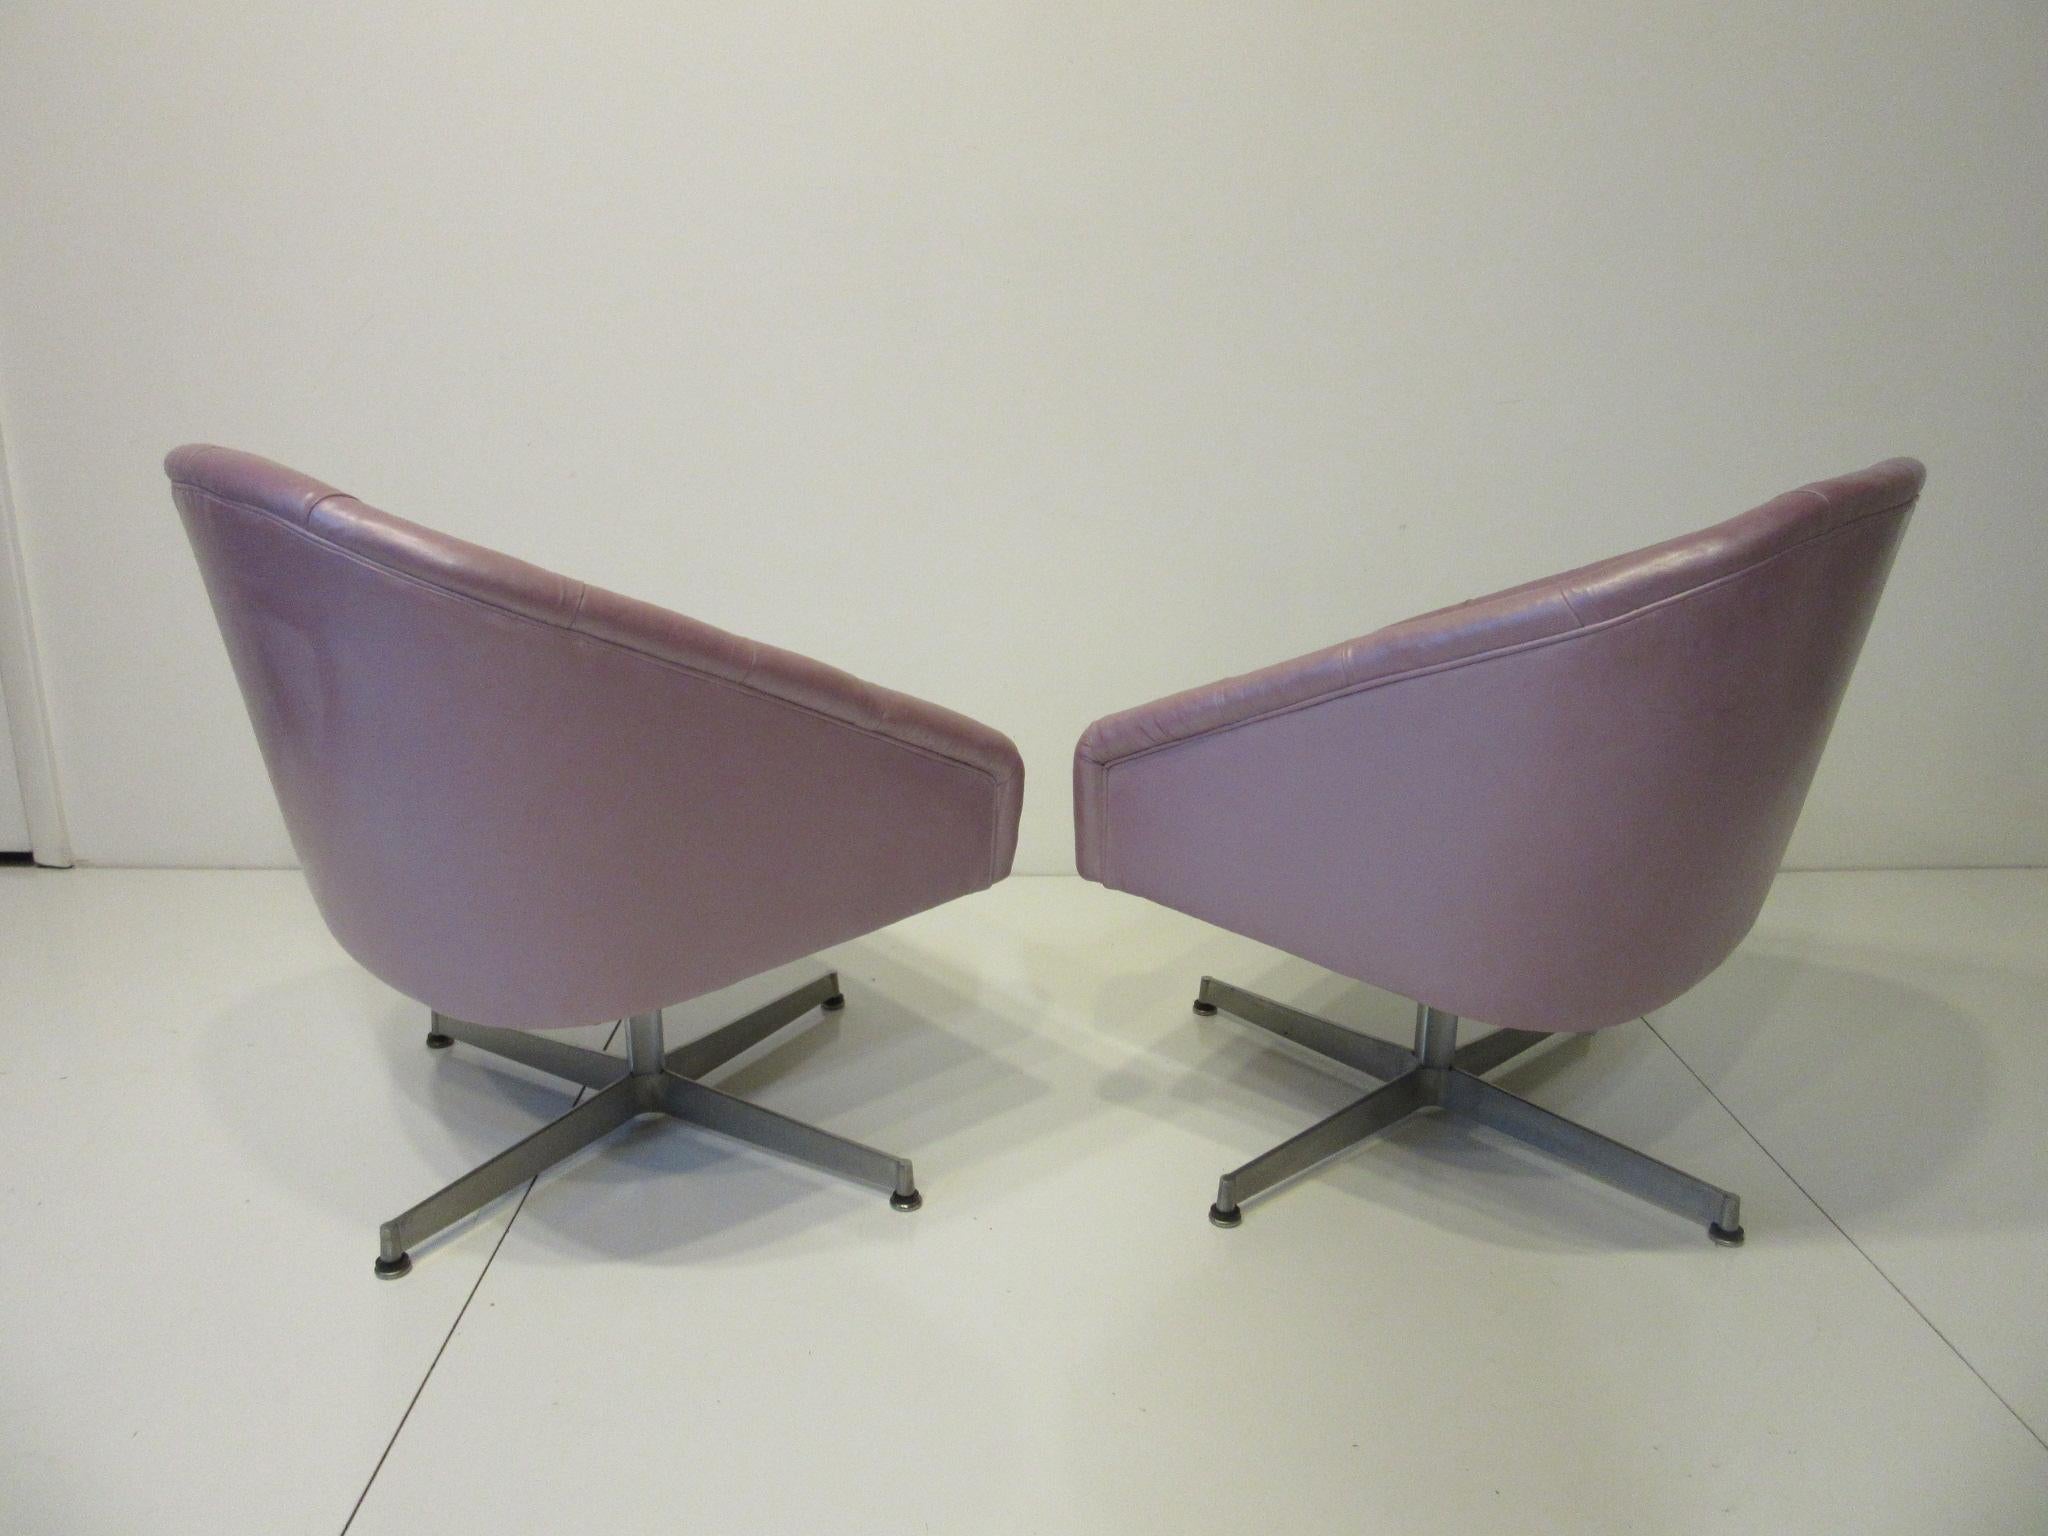 Midcentury Tufted Leatherette Swivel Chairs by Shelby Williams In Good Condition For Sale In Cincinnati, OH